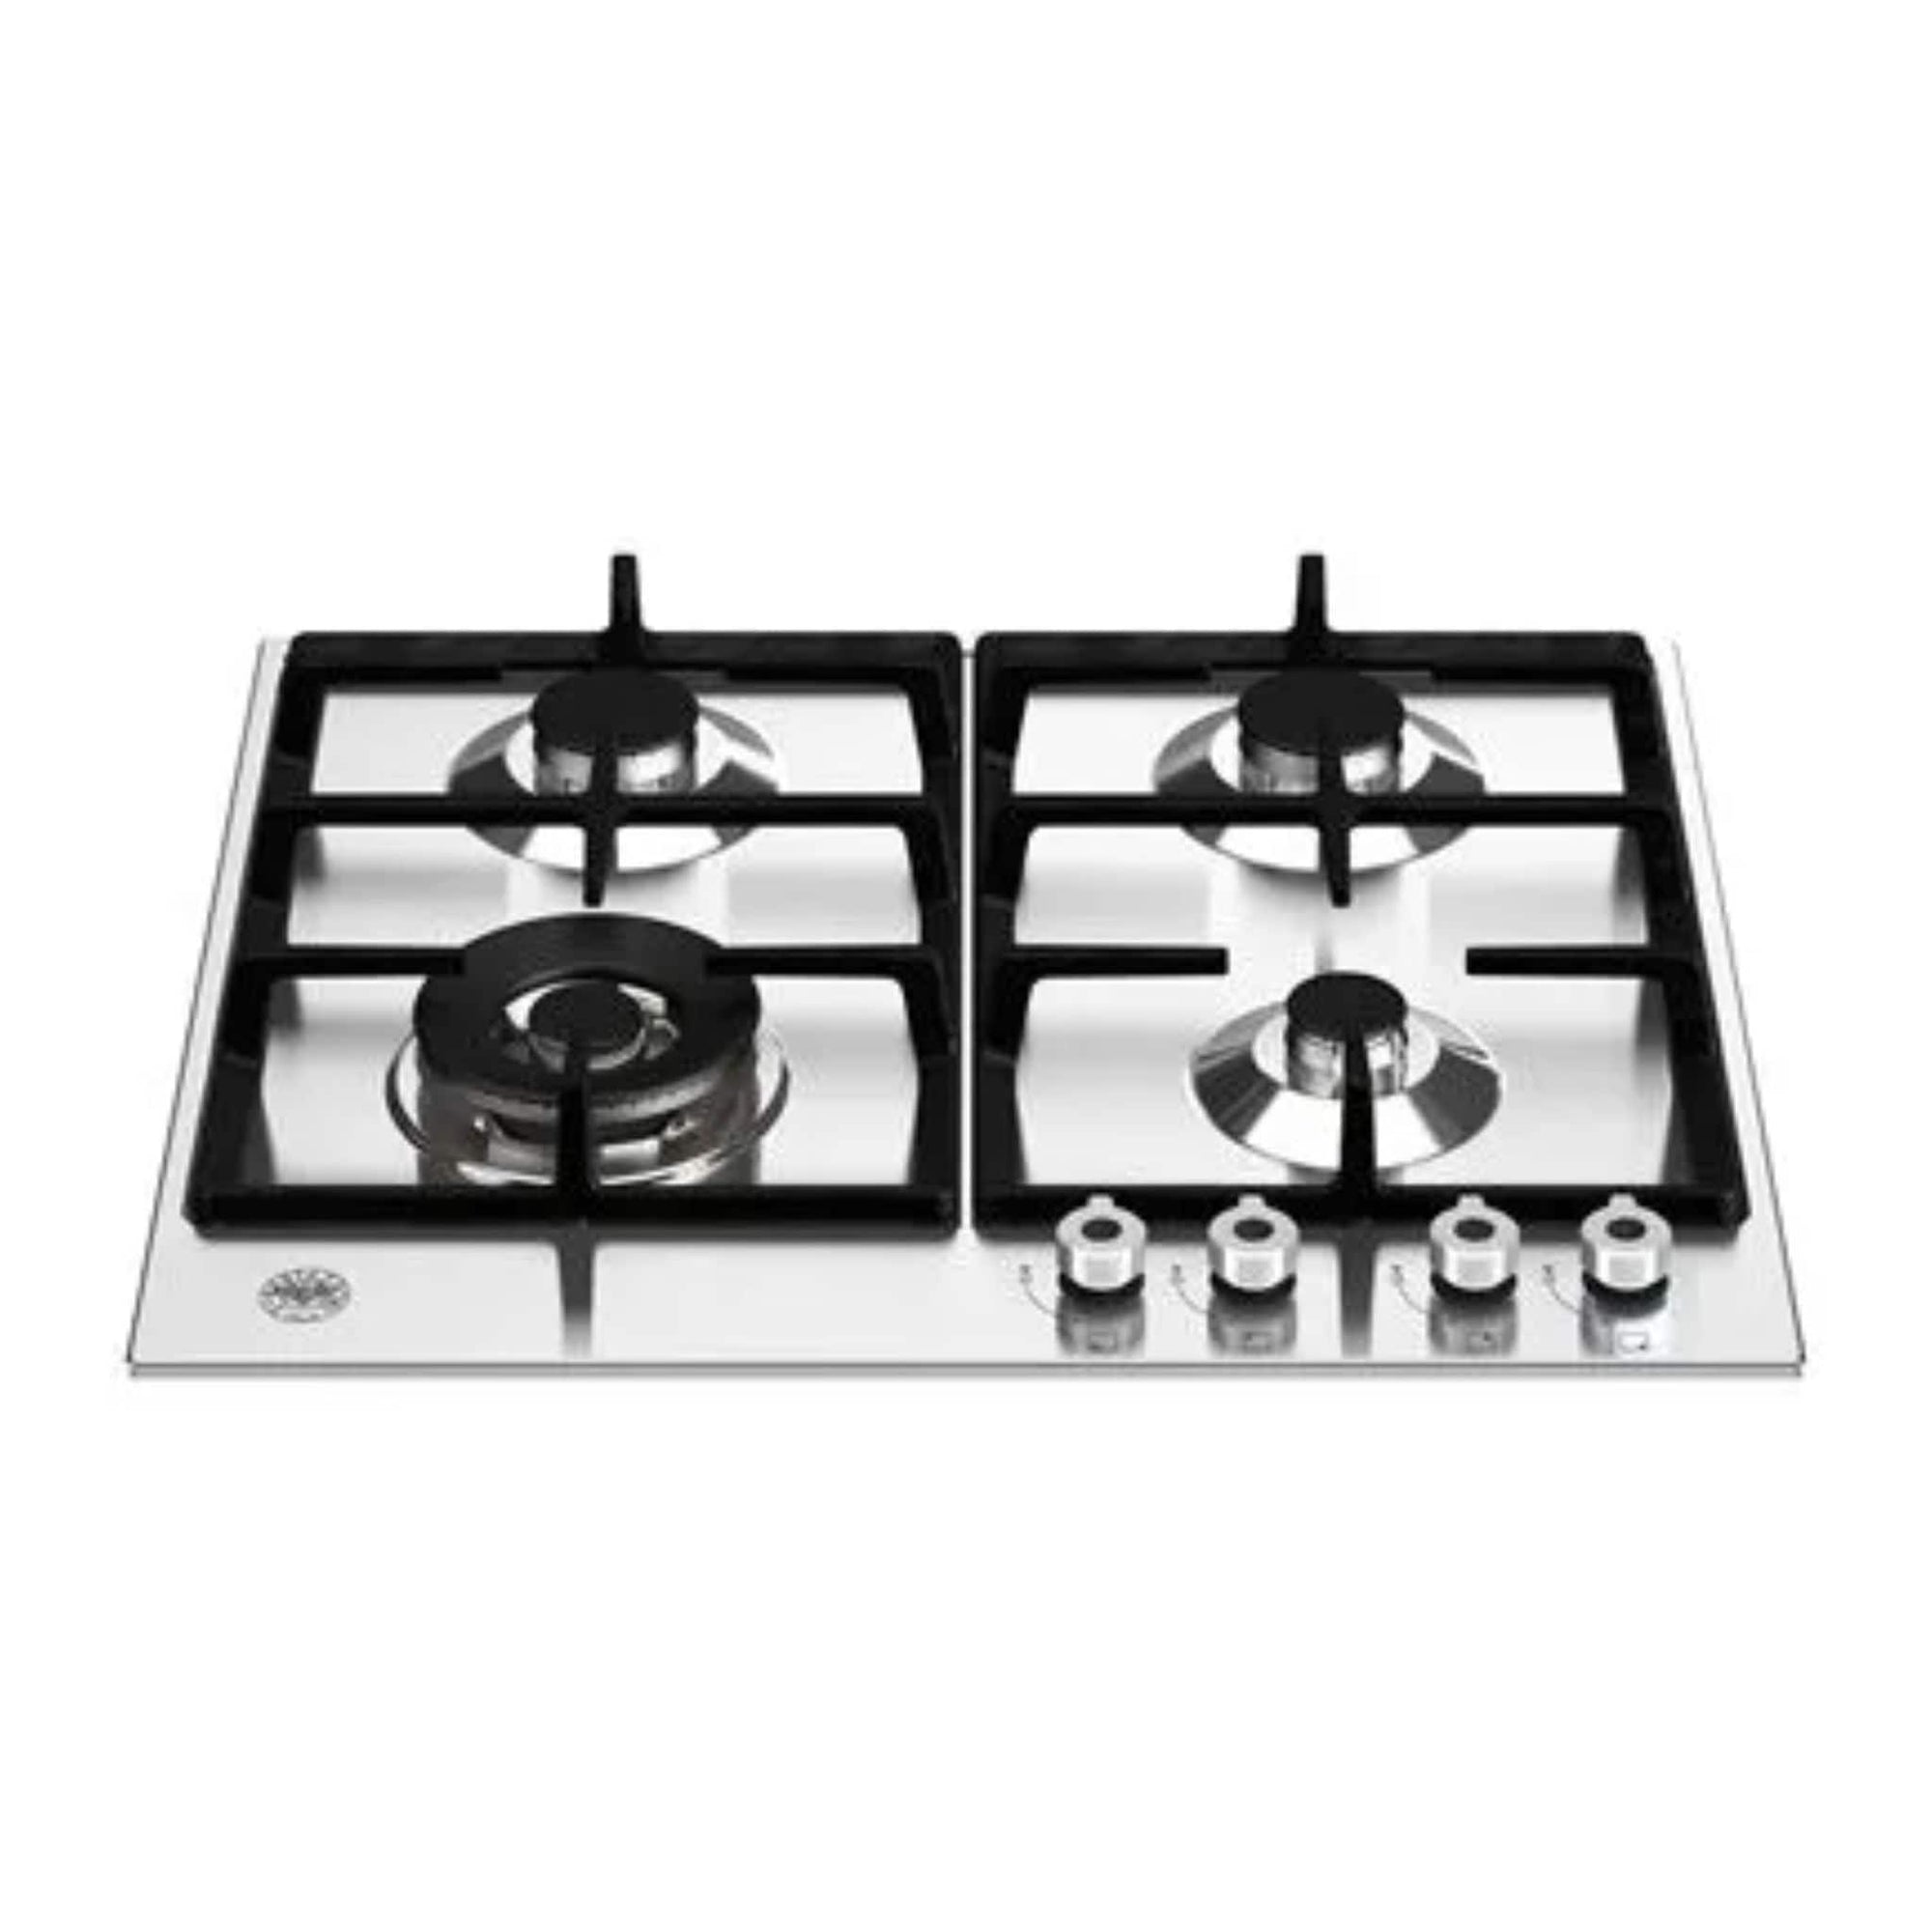 Bertazzoni 24" Pro Series Front Control Gas Cooktop 4 Burner - Culinary Hardware